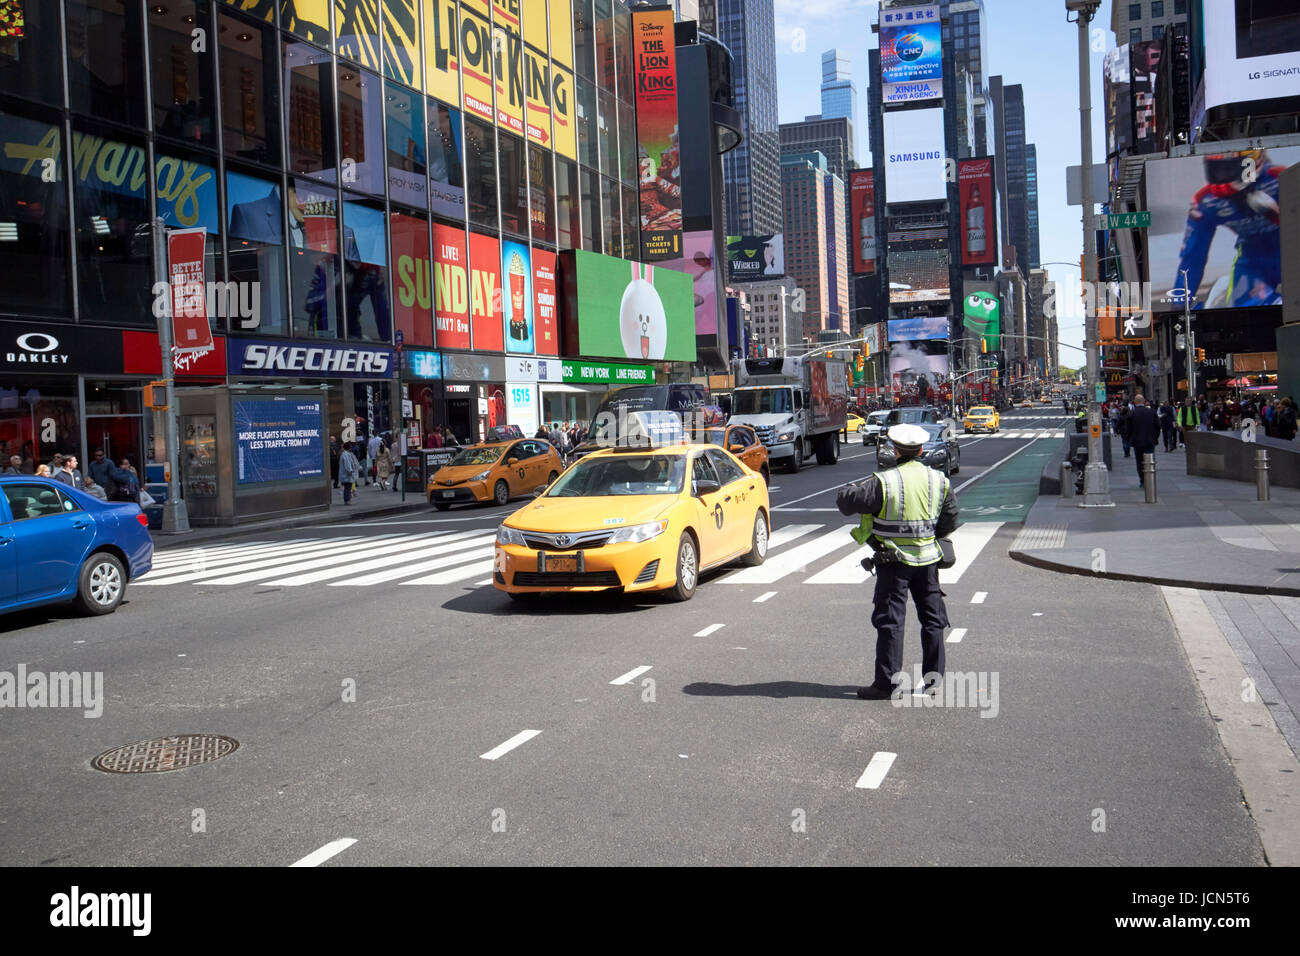 Trafic cop nypd sur Times Square New York USA Banque D'Images